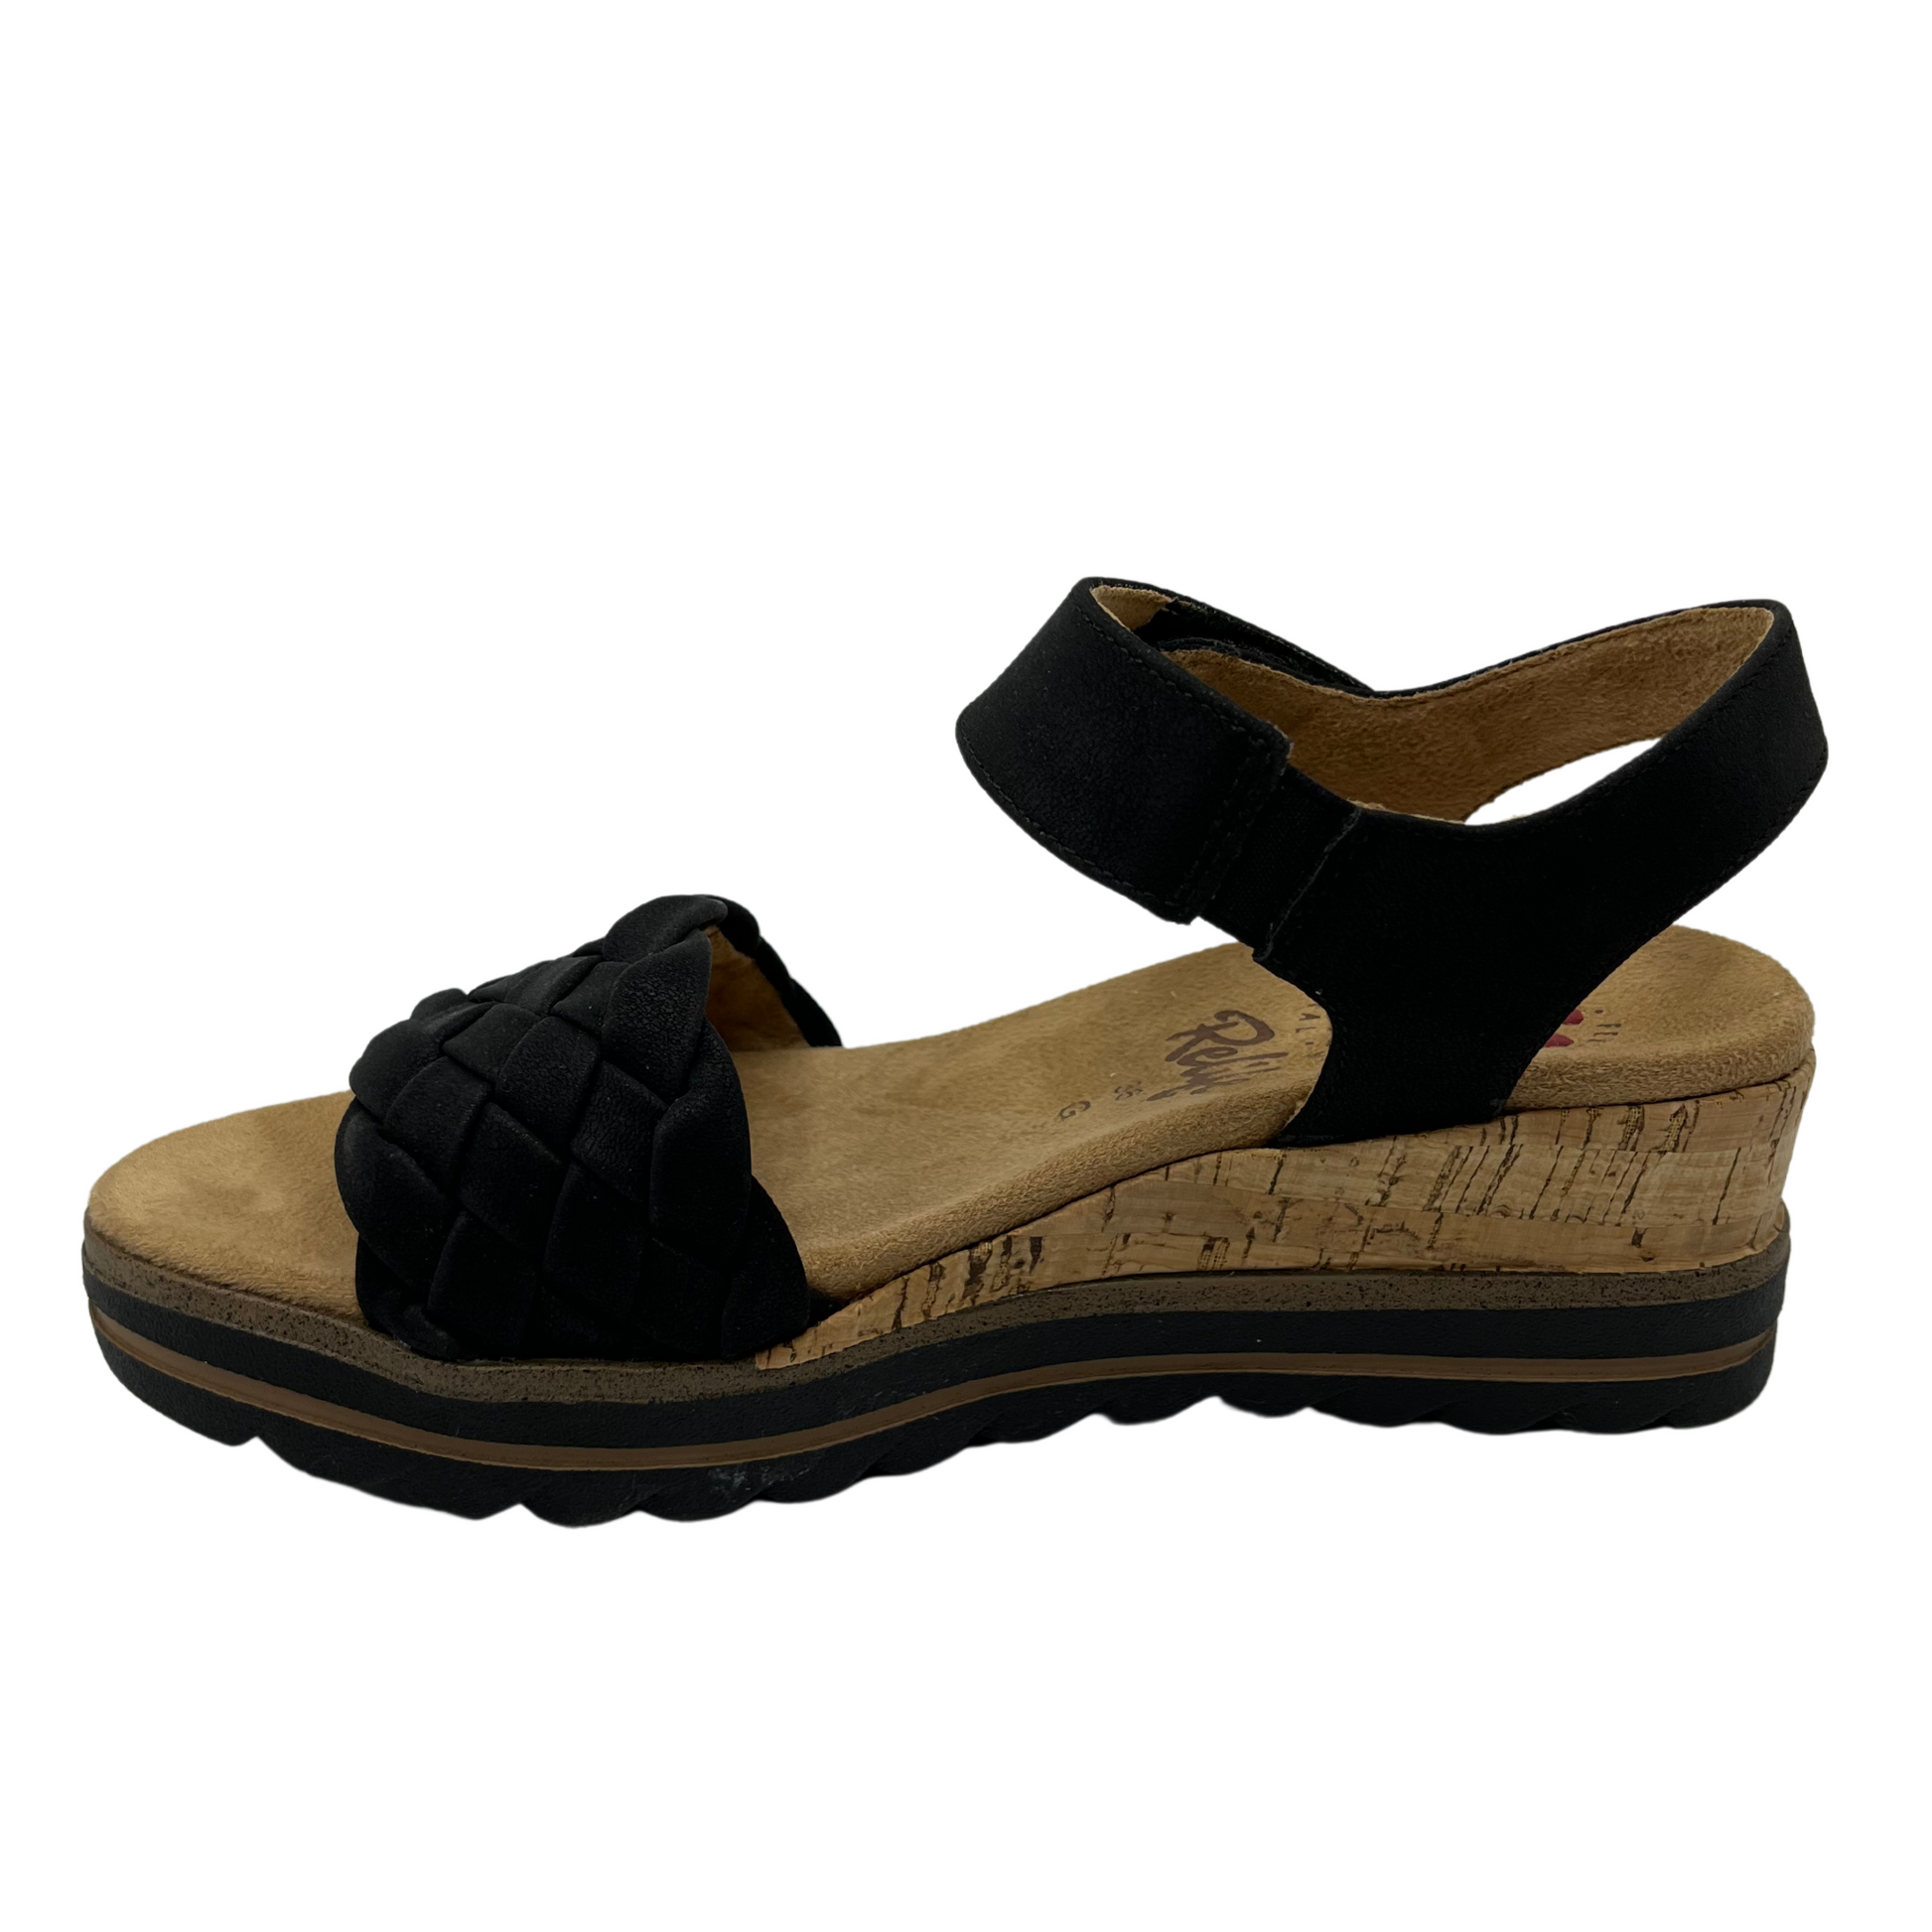 Left facing view of black strapped wedge sandal with velcro strap